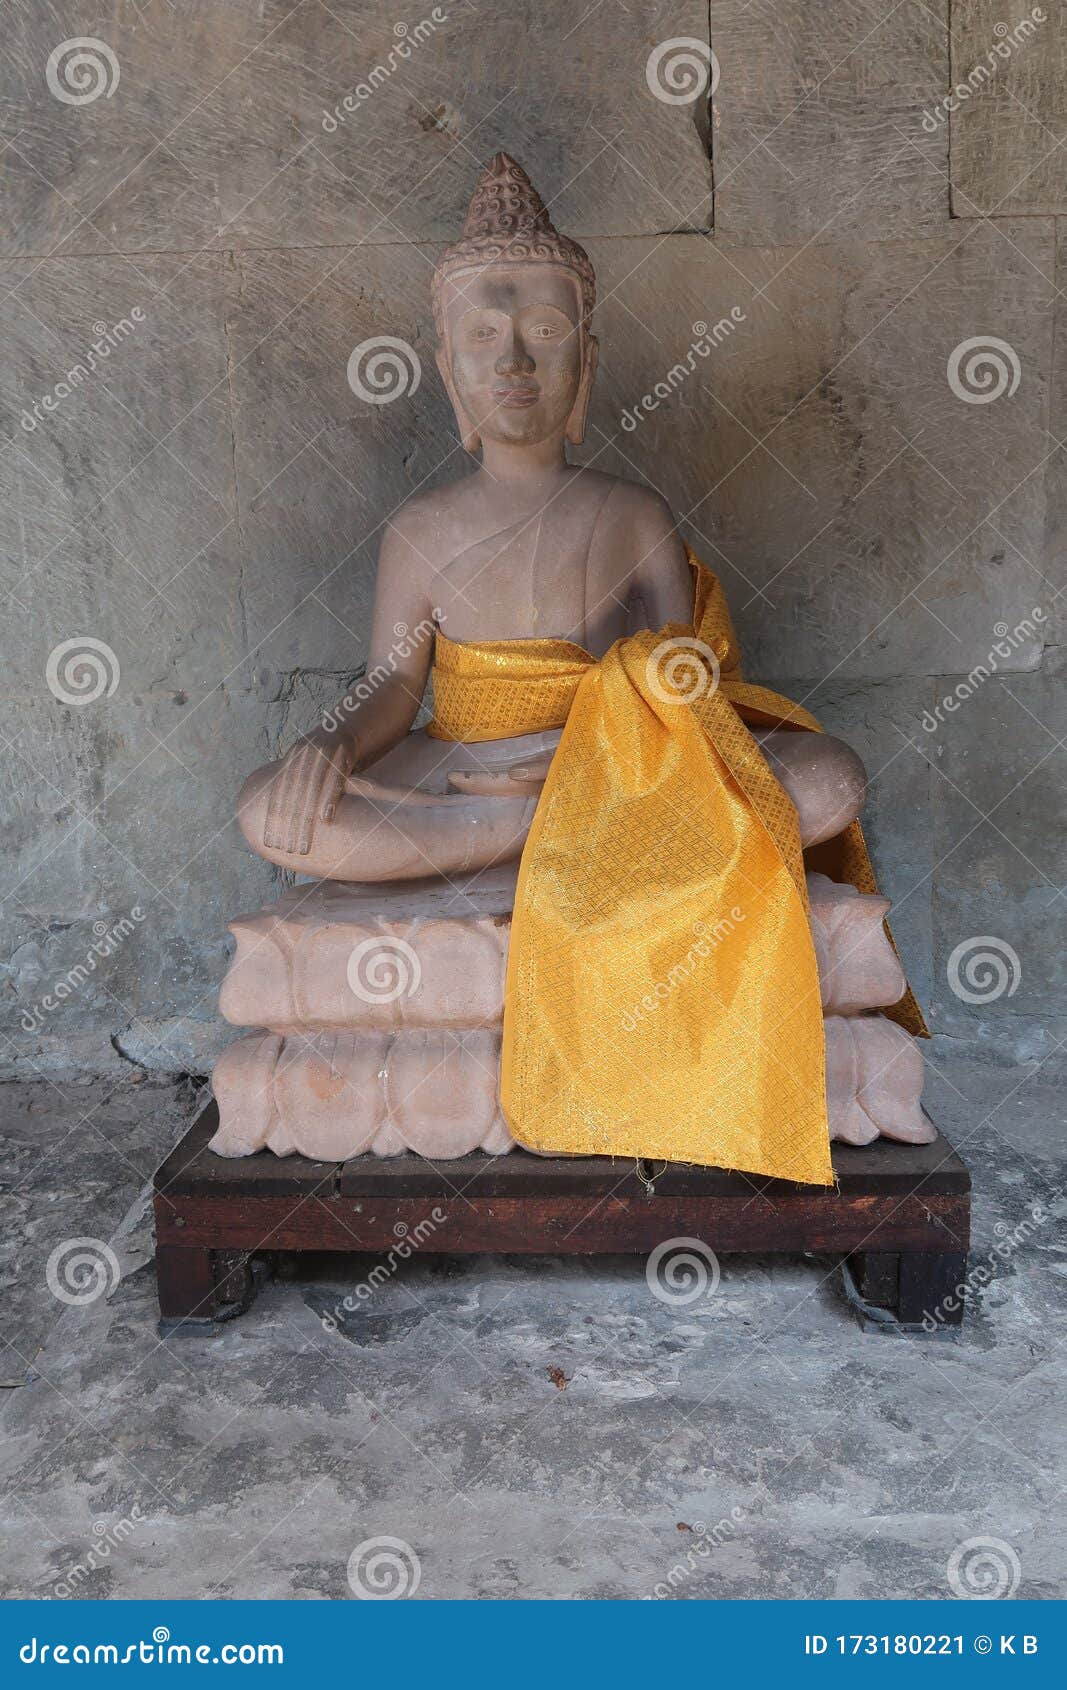 beautiful stone statue of buddha with yellow scarf in ancient angkor wat temple, religous site for hindu and buddhism